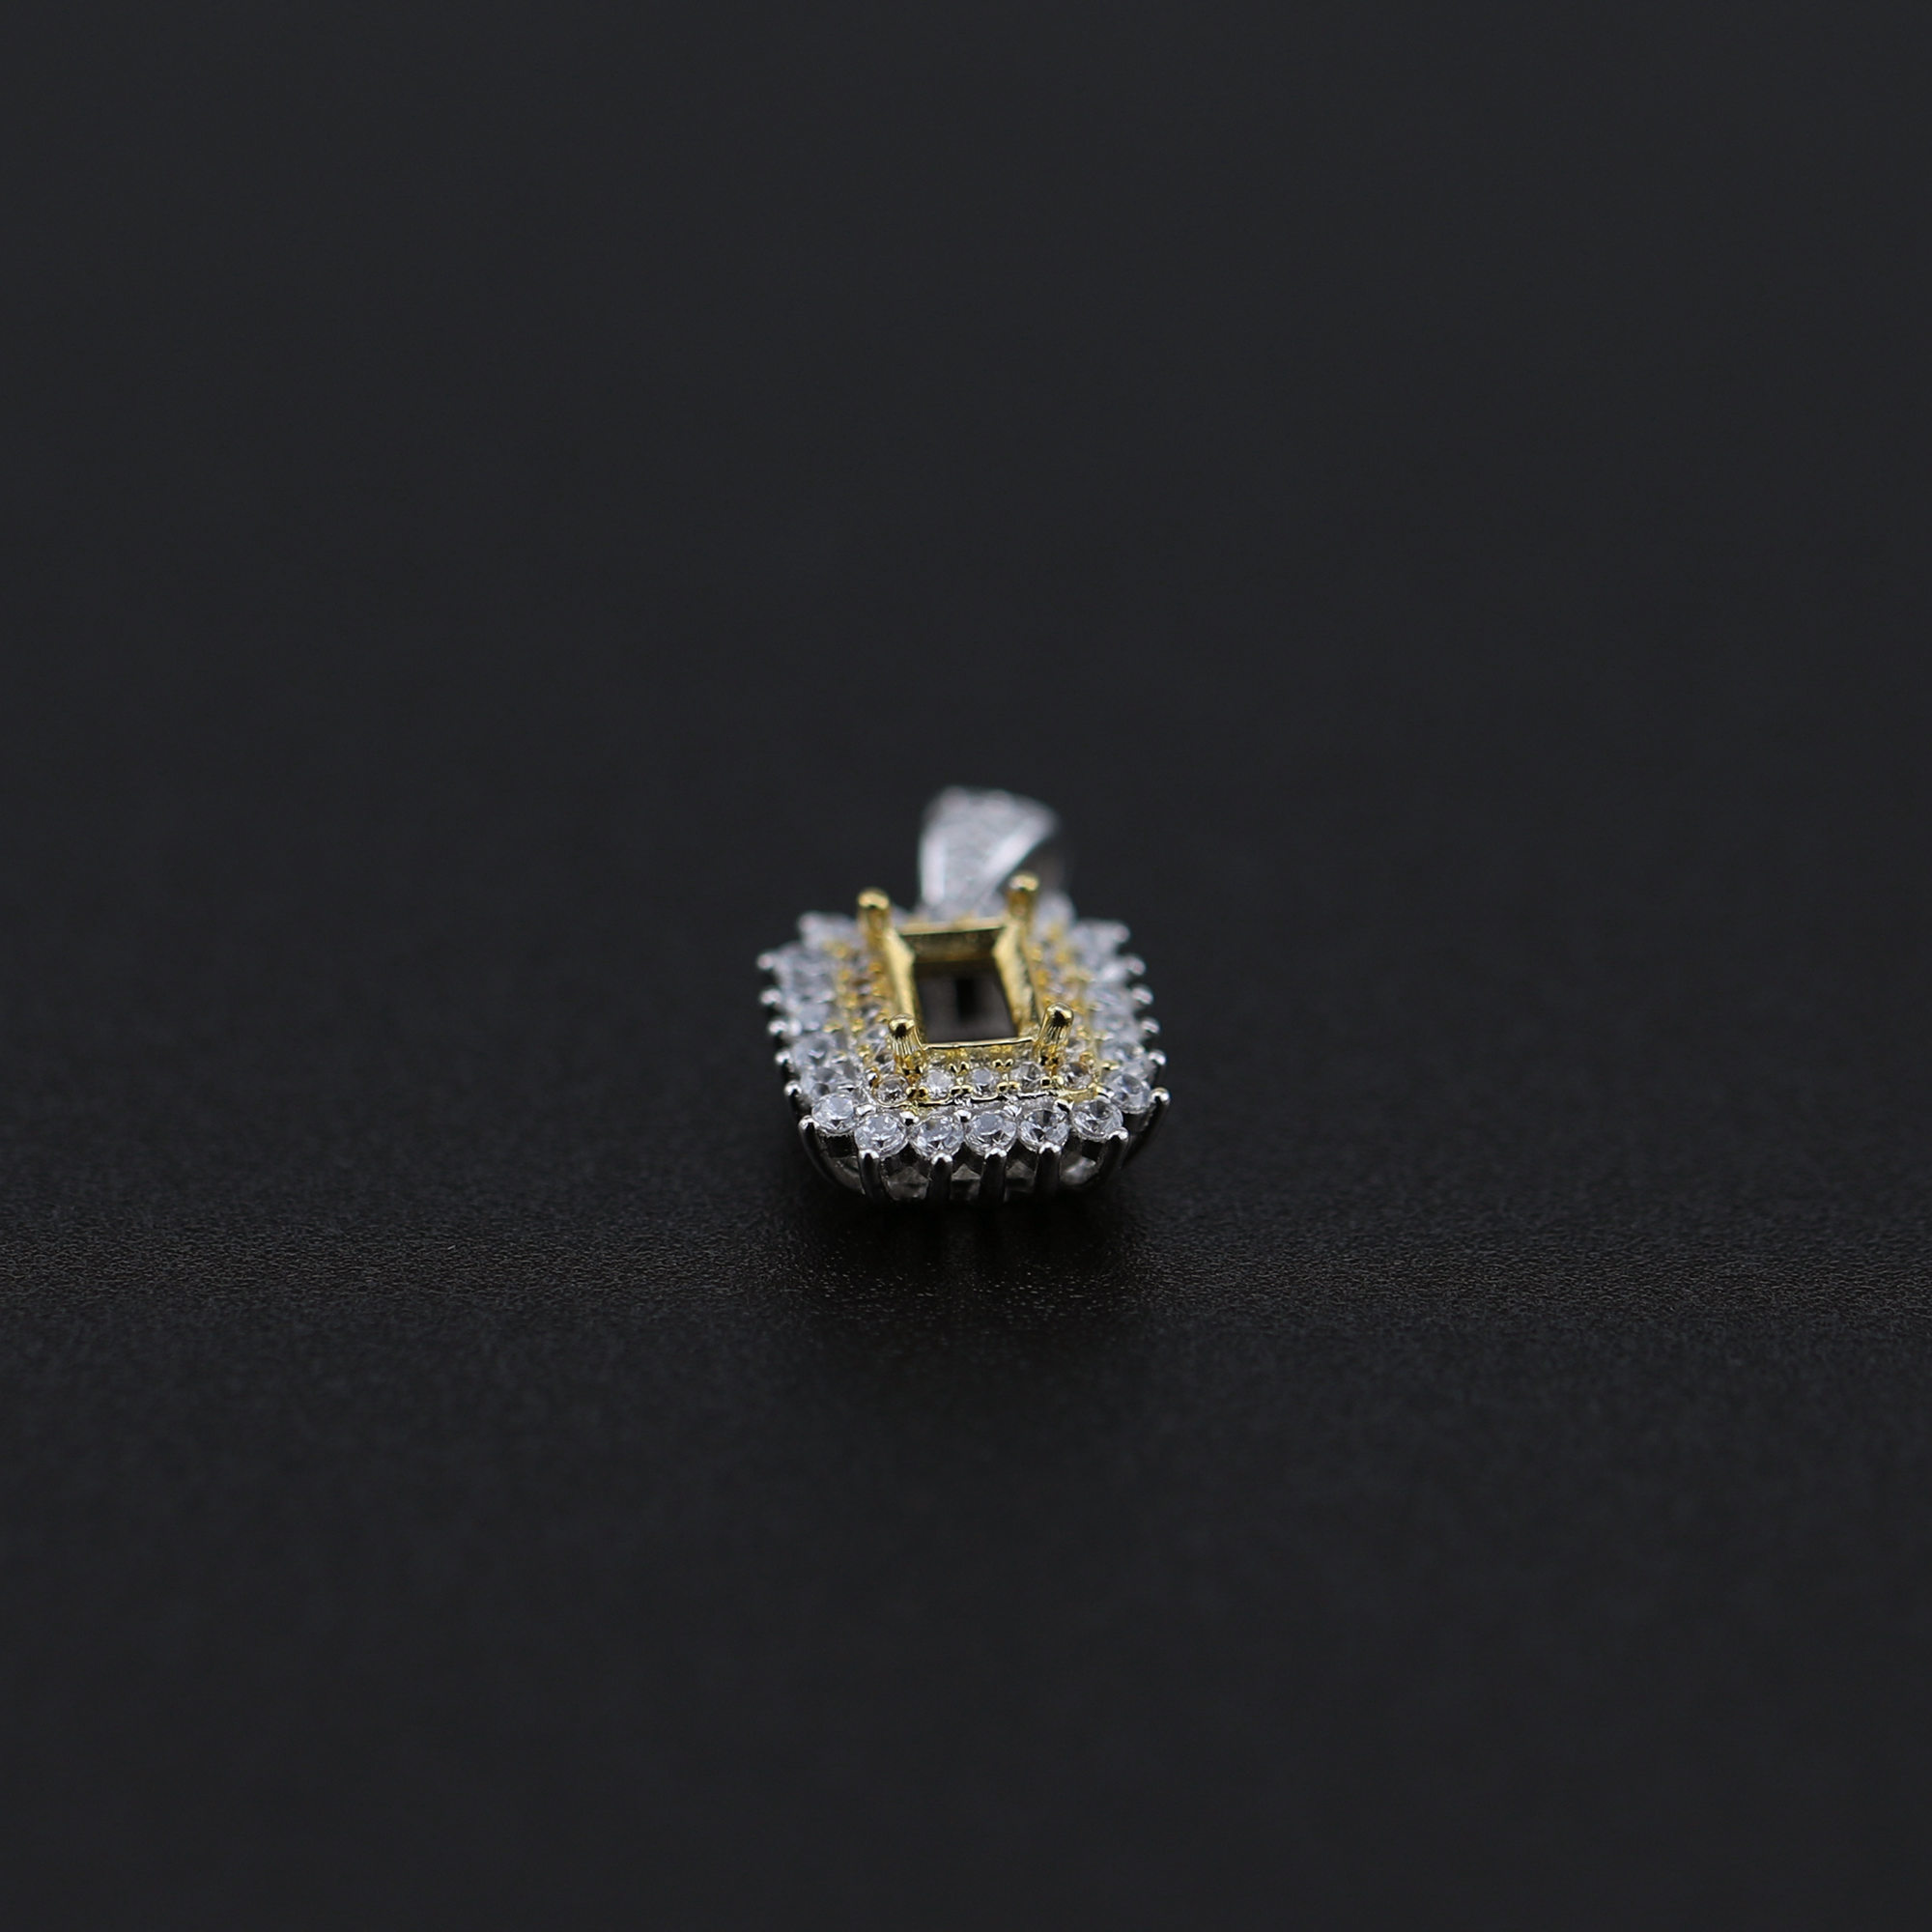 1Pcs 4x6MM Rectangle Prong Bezel Gold Plated Solid 925 Sterling Silver Pave Pendant Blank Settings for Moissanite Gemstone 1431048 - Click Image to Close